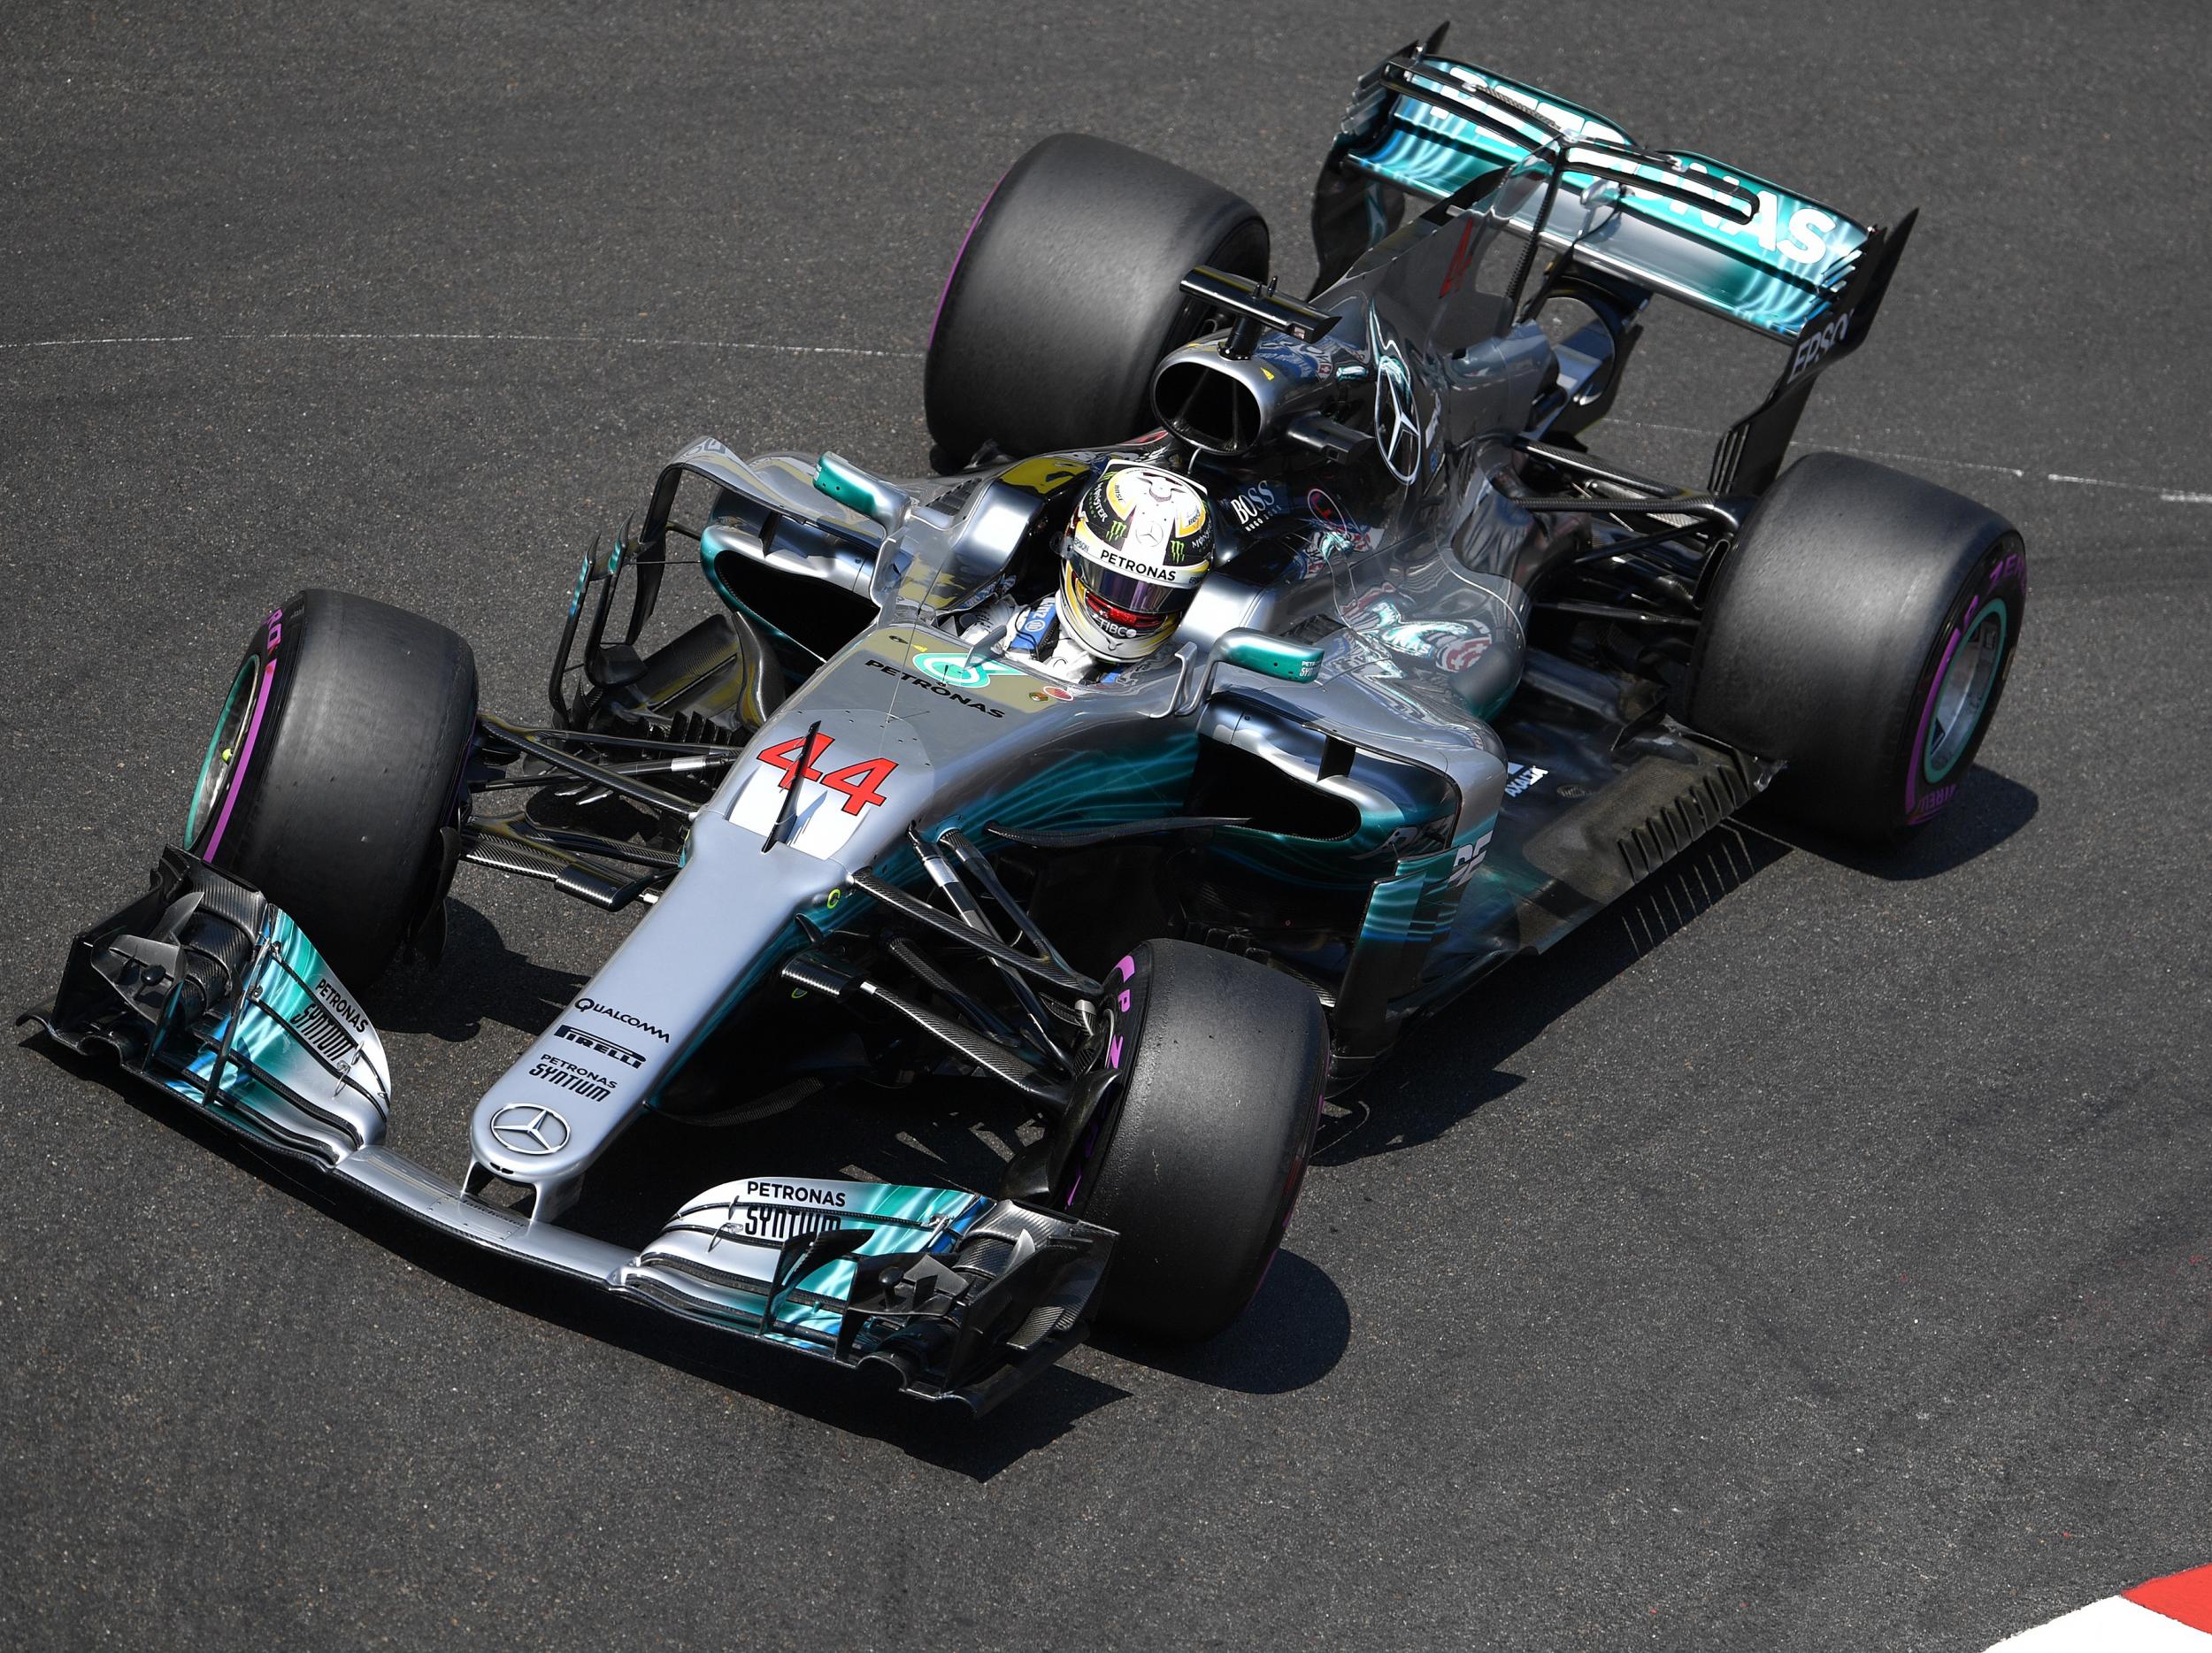 Hamilton qualified in a lowly 14th-position